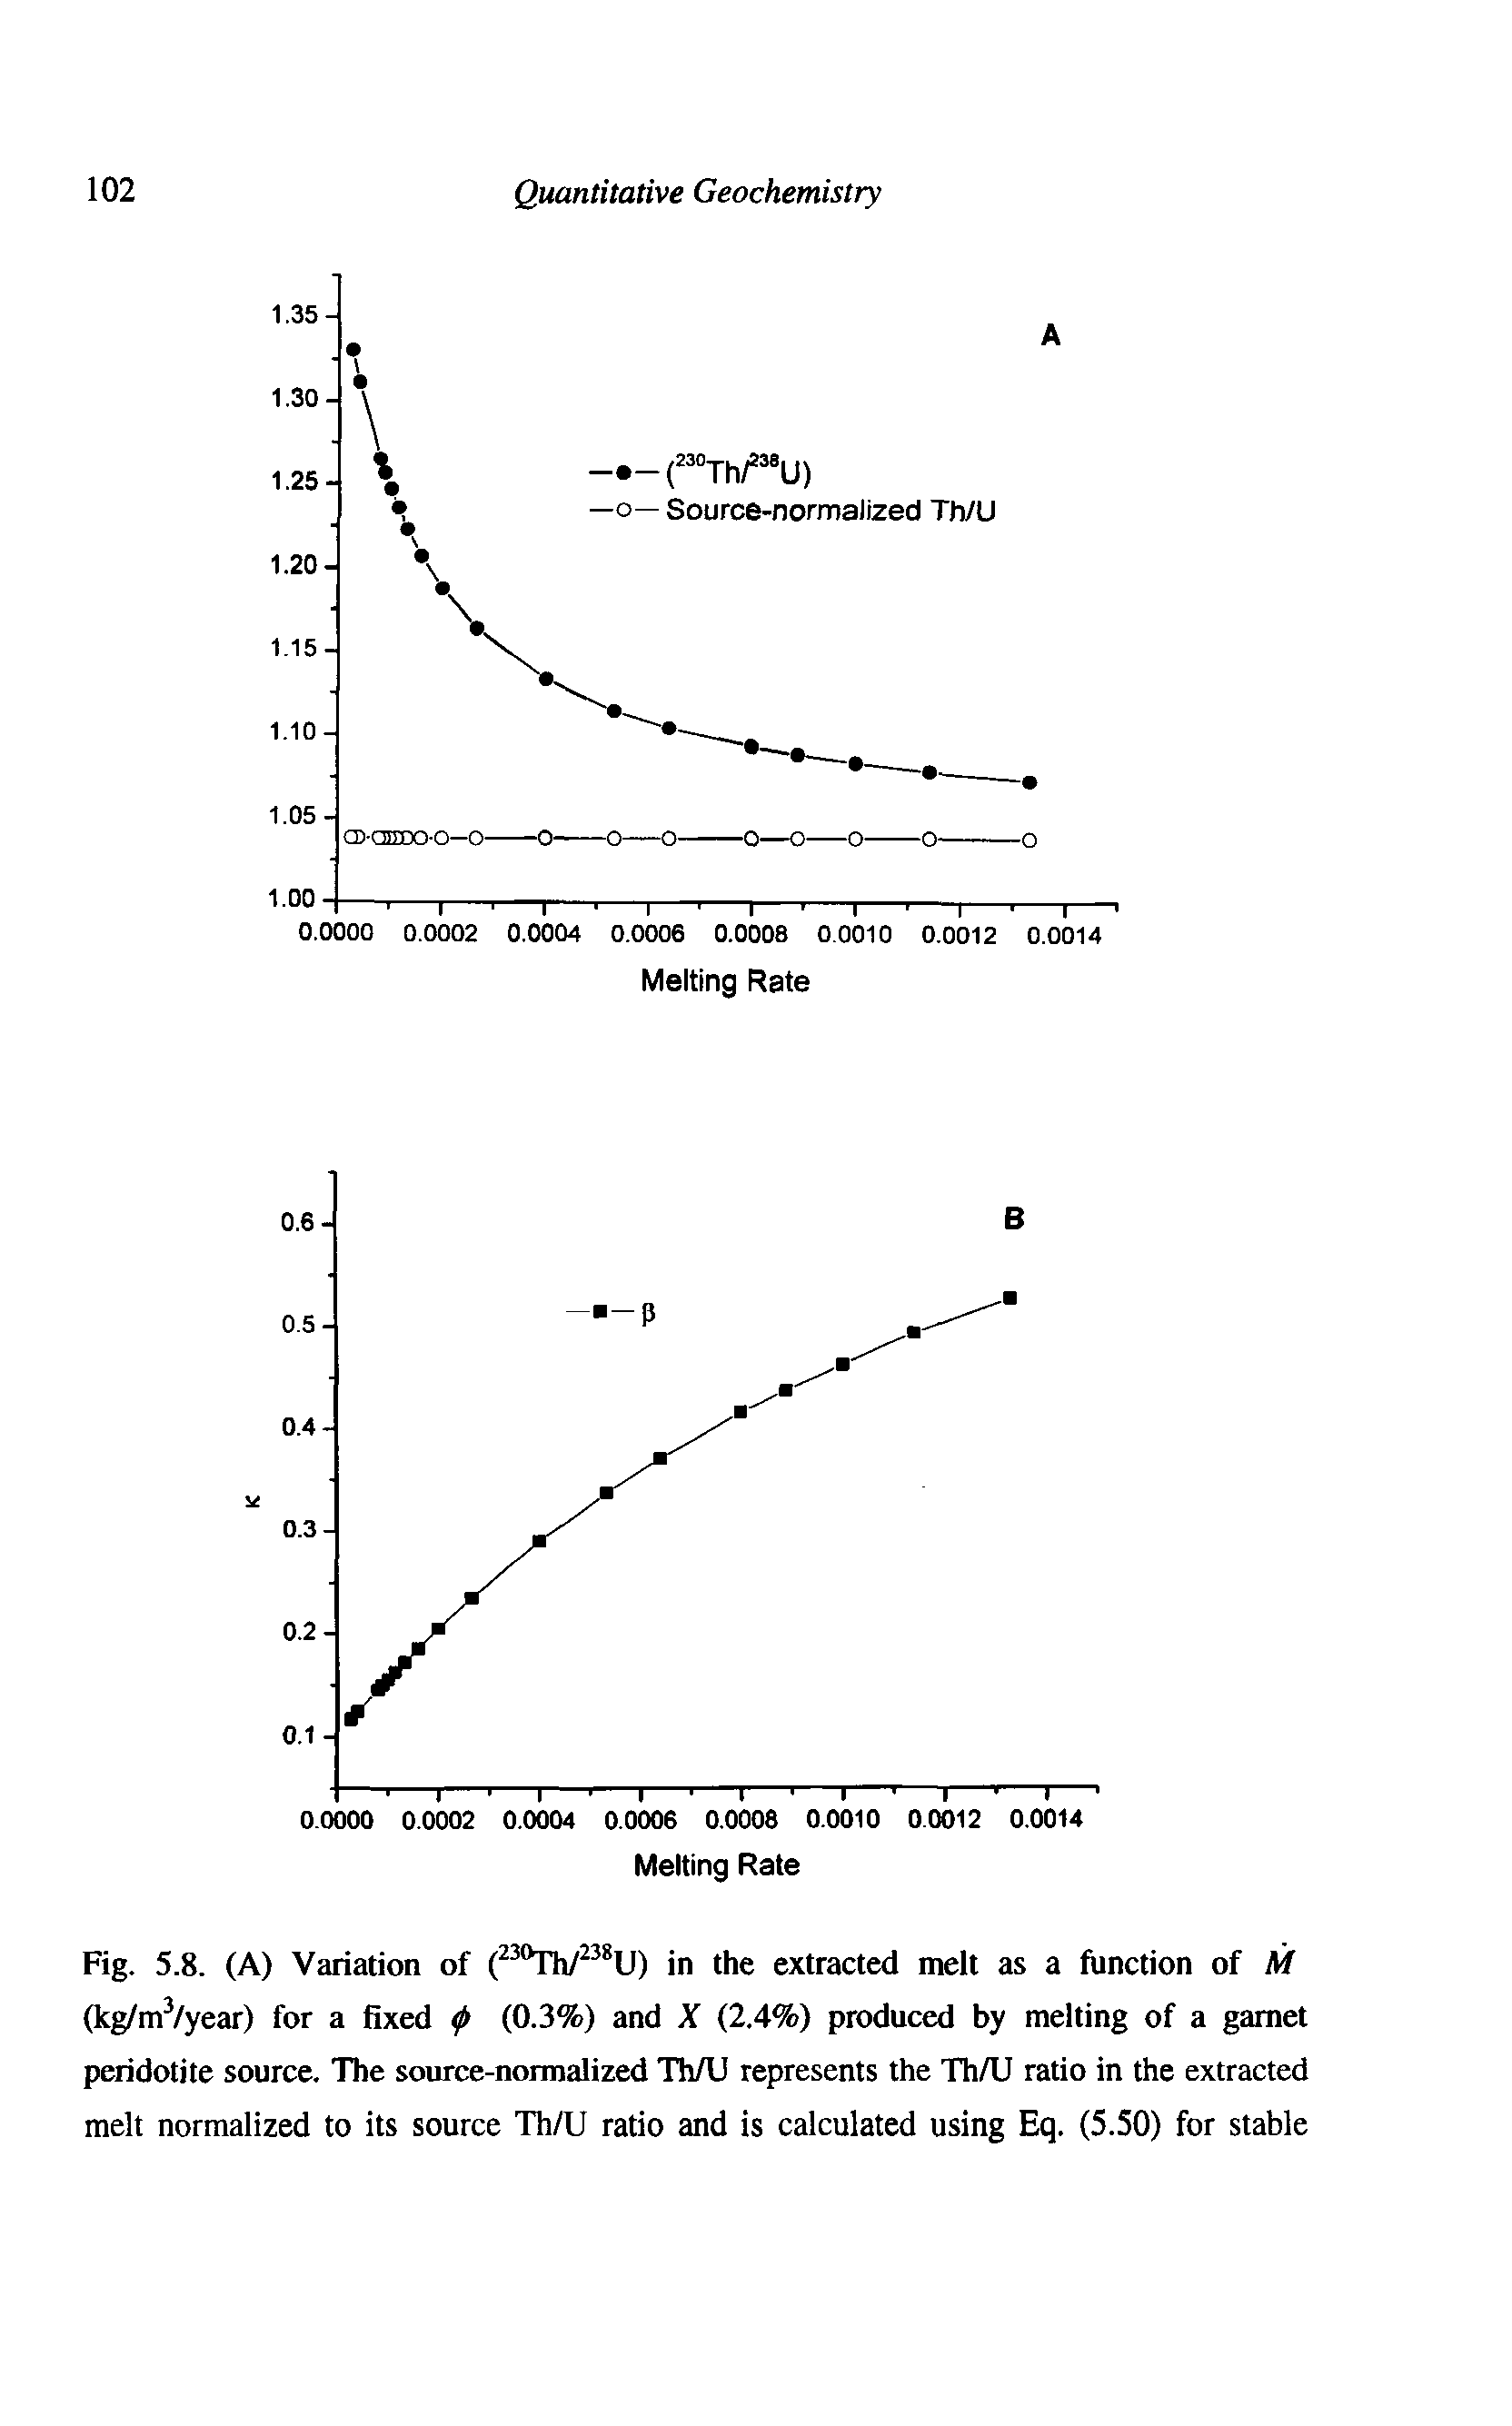 Fig. 5.8. (A) Variation of ( Th/ U) in the extracted melt as a function of M (kg/mVyear) for a fixed (0.3%) and X (2.4%) produced by melting of a garnet peridotite source. The source-normalized ThAJ represents the Th/U ratio in the extracted melt normalized to its source Th/U ratio and is calculated using Eq. (5.50) for stable...